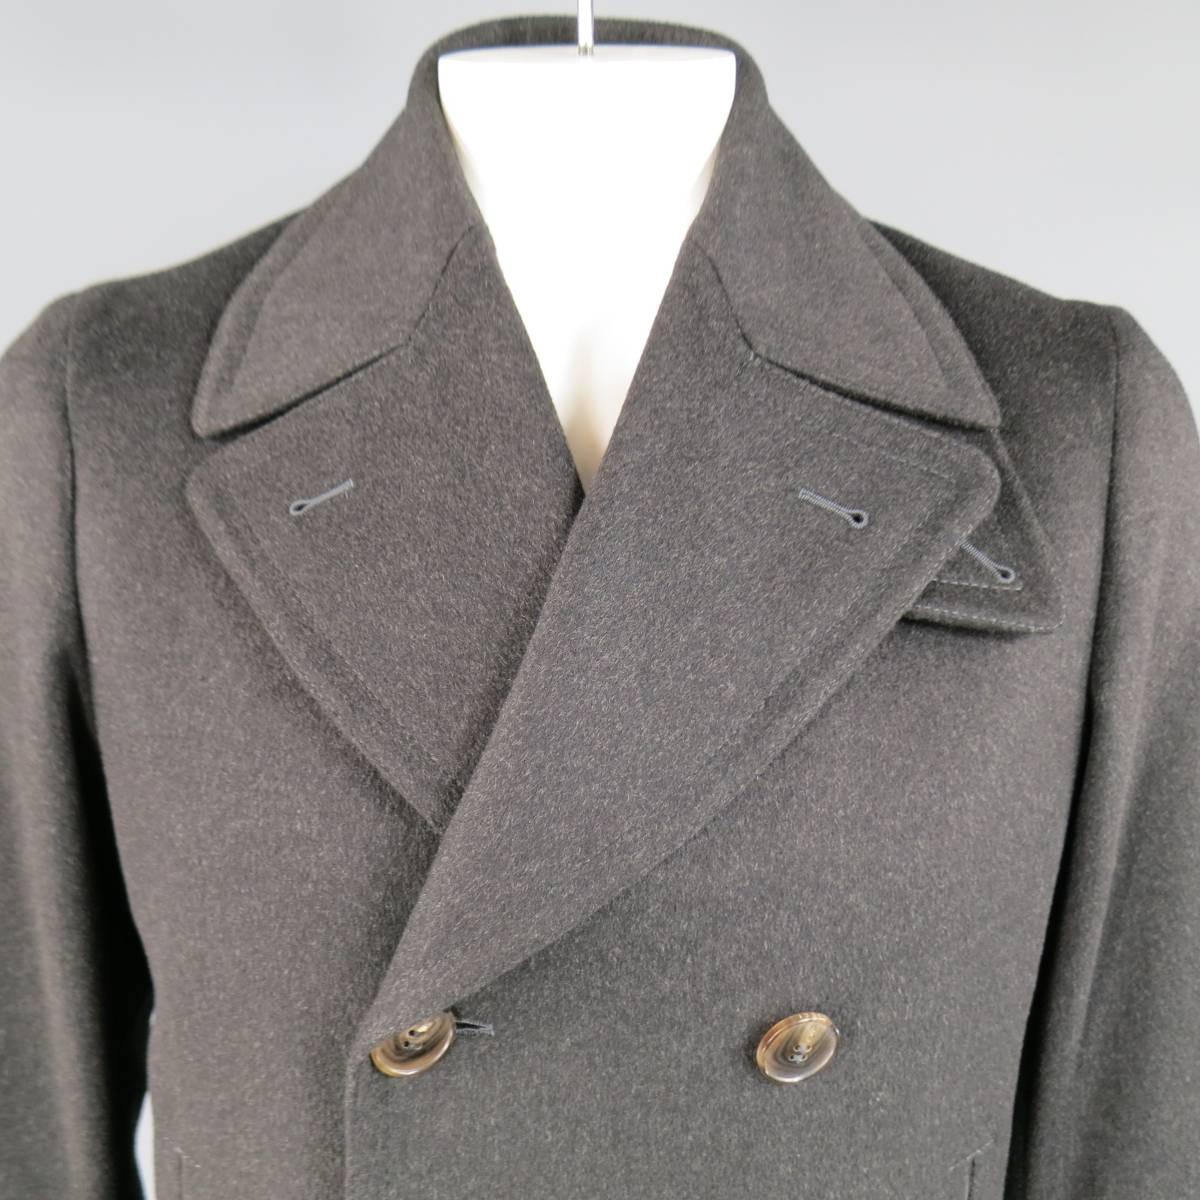 Classic double breasted peacoat by GUCCI in a soft bushed wool with pointed lapel, slit pockets, detachable storm flap collar, and epaulet cuffs. Made in Italy.
 
Excellent Pre-Owned Condition.
Marked: IT 50
 
Measurements:
 
Shoulder: 18